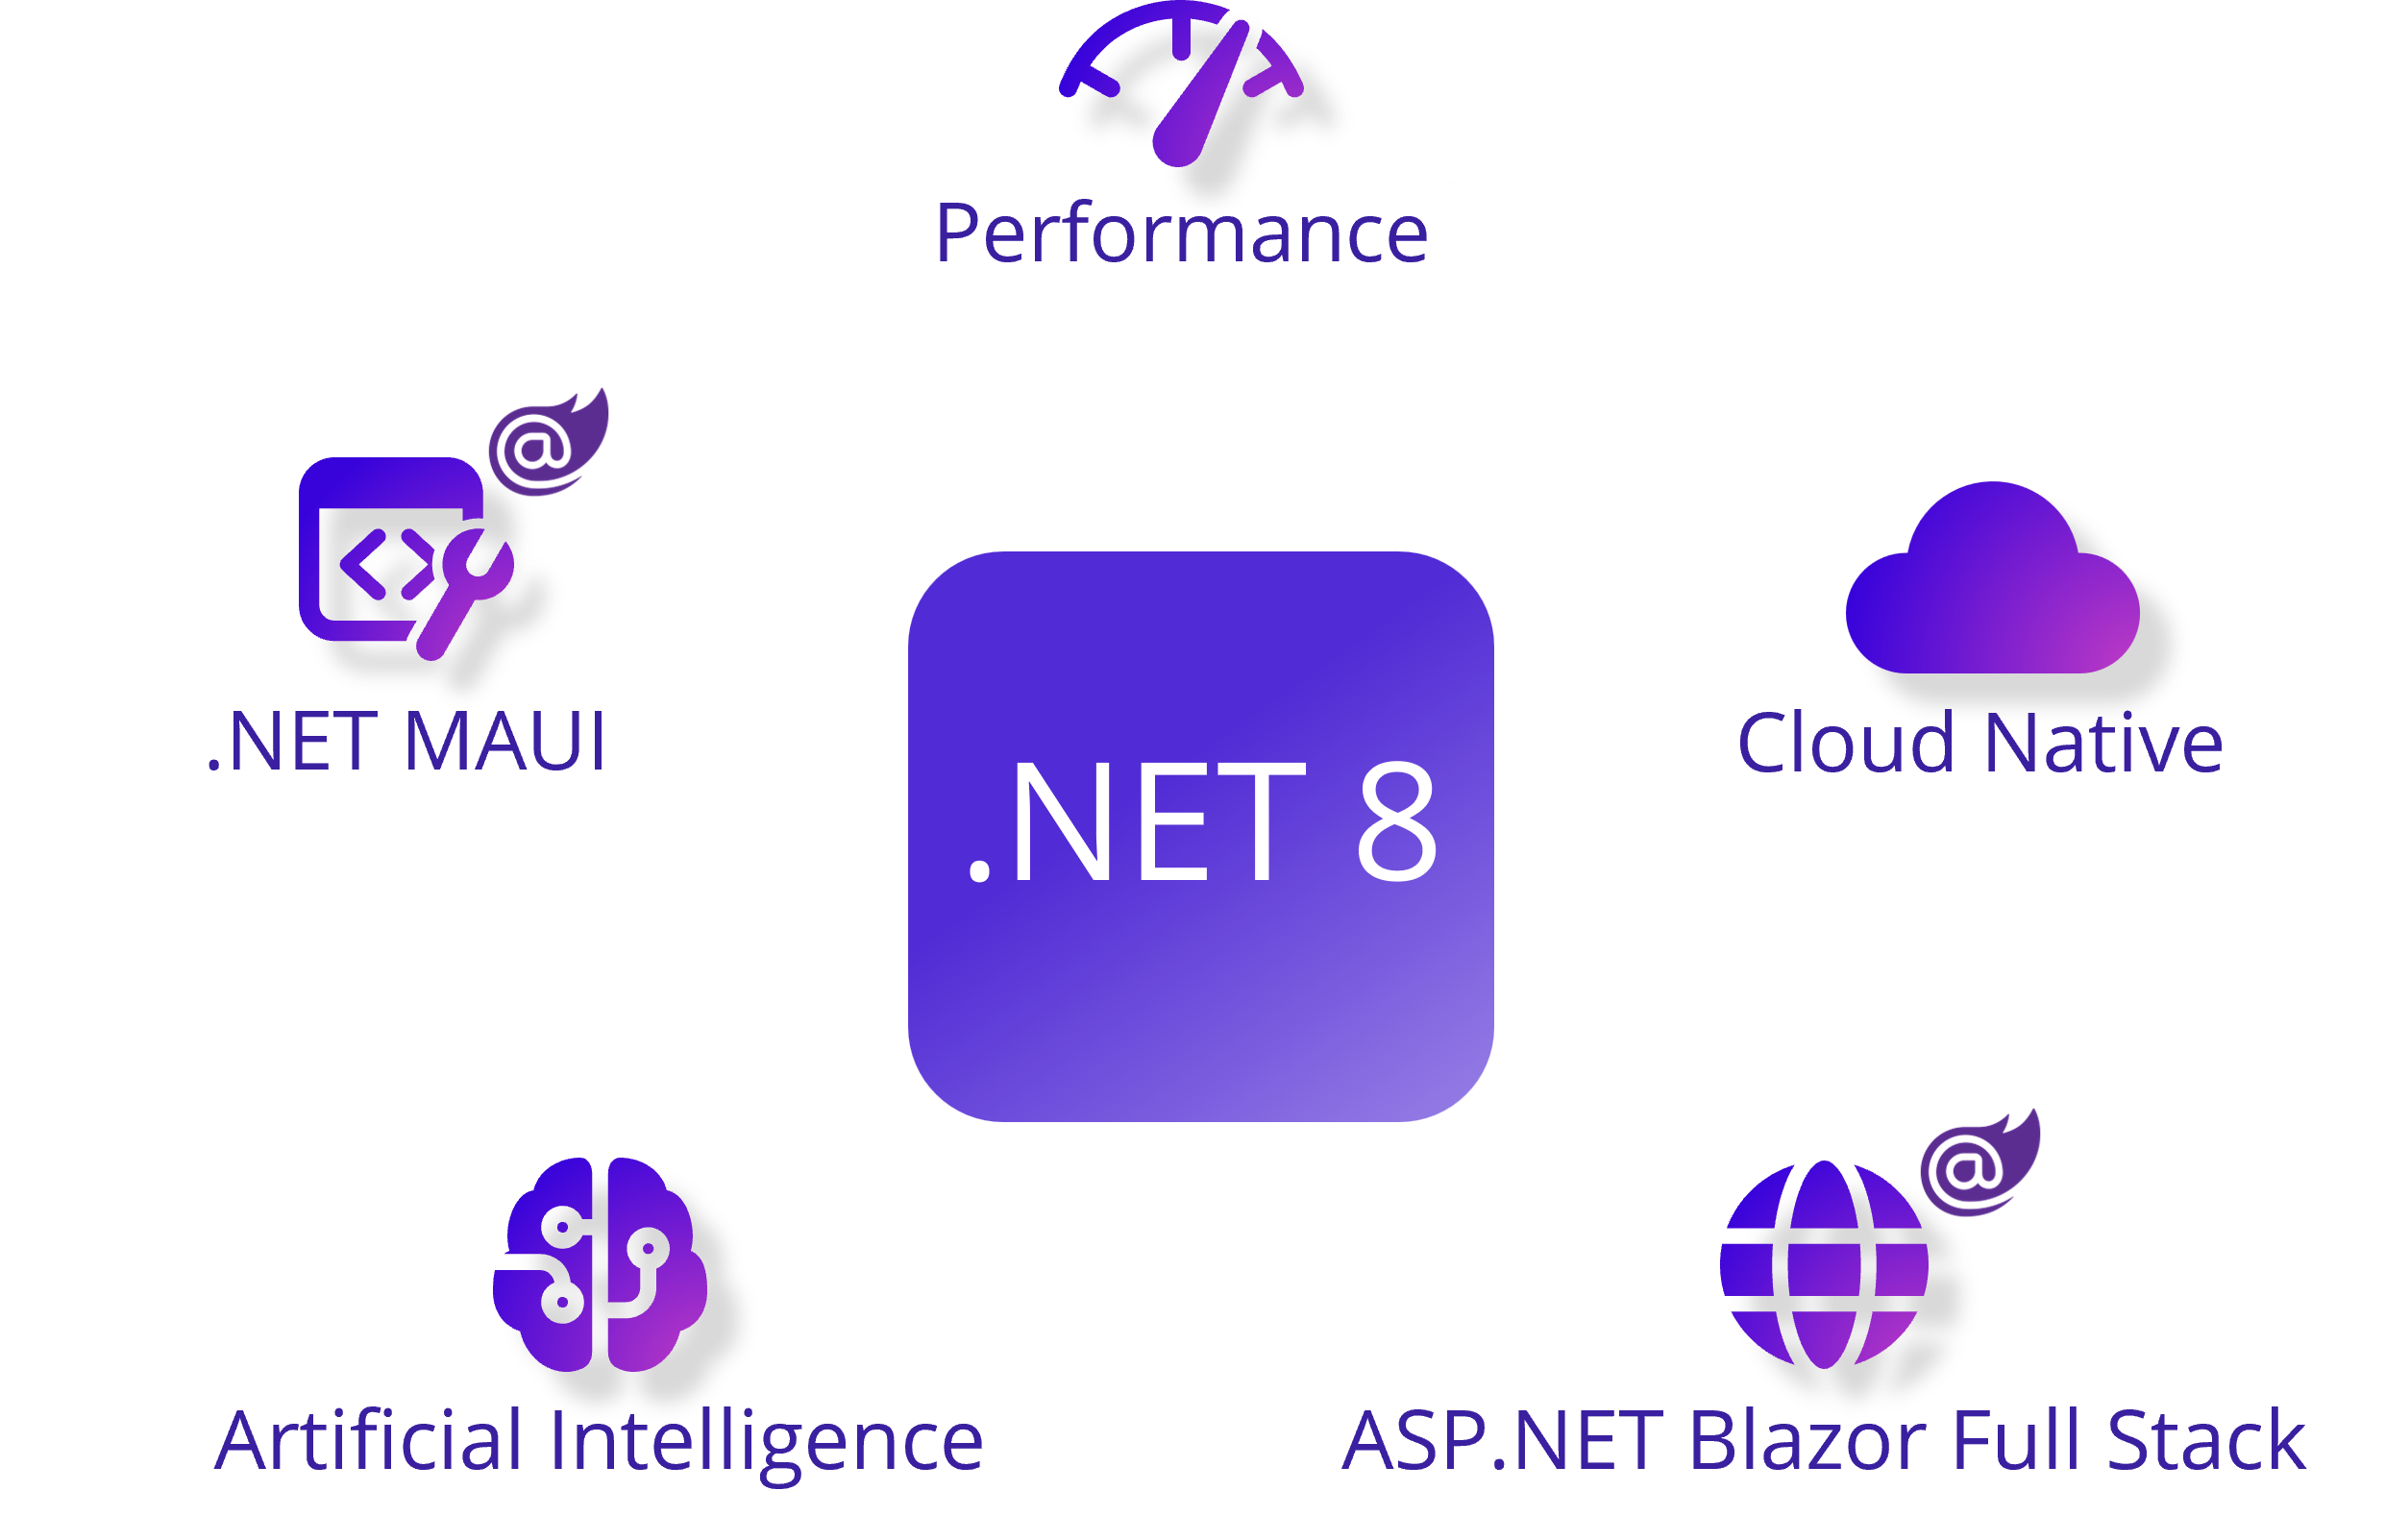 .NET 8 is now available